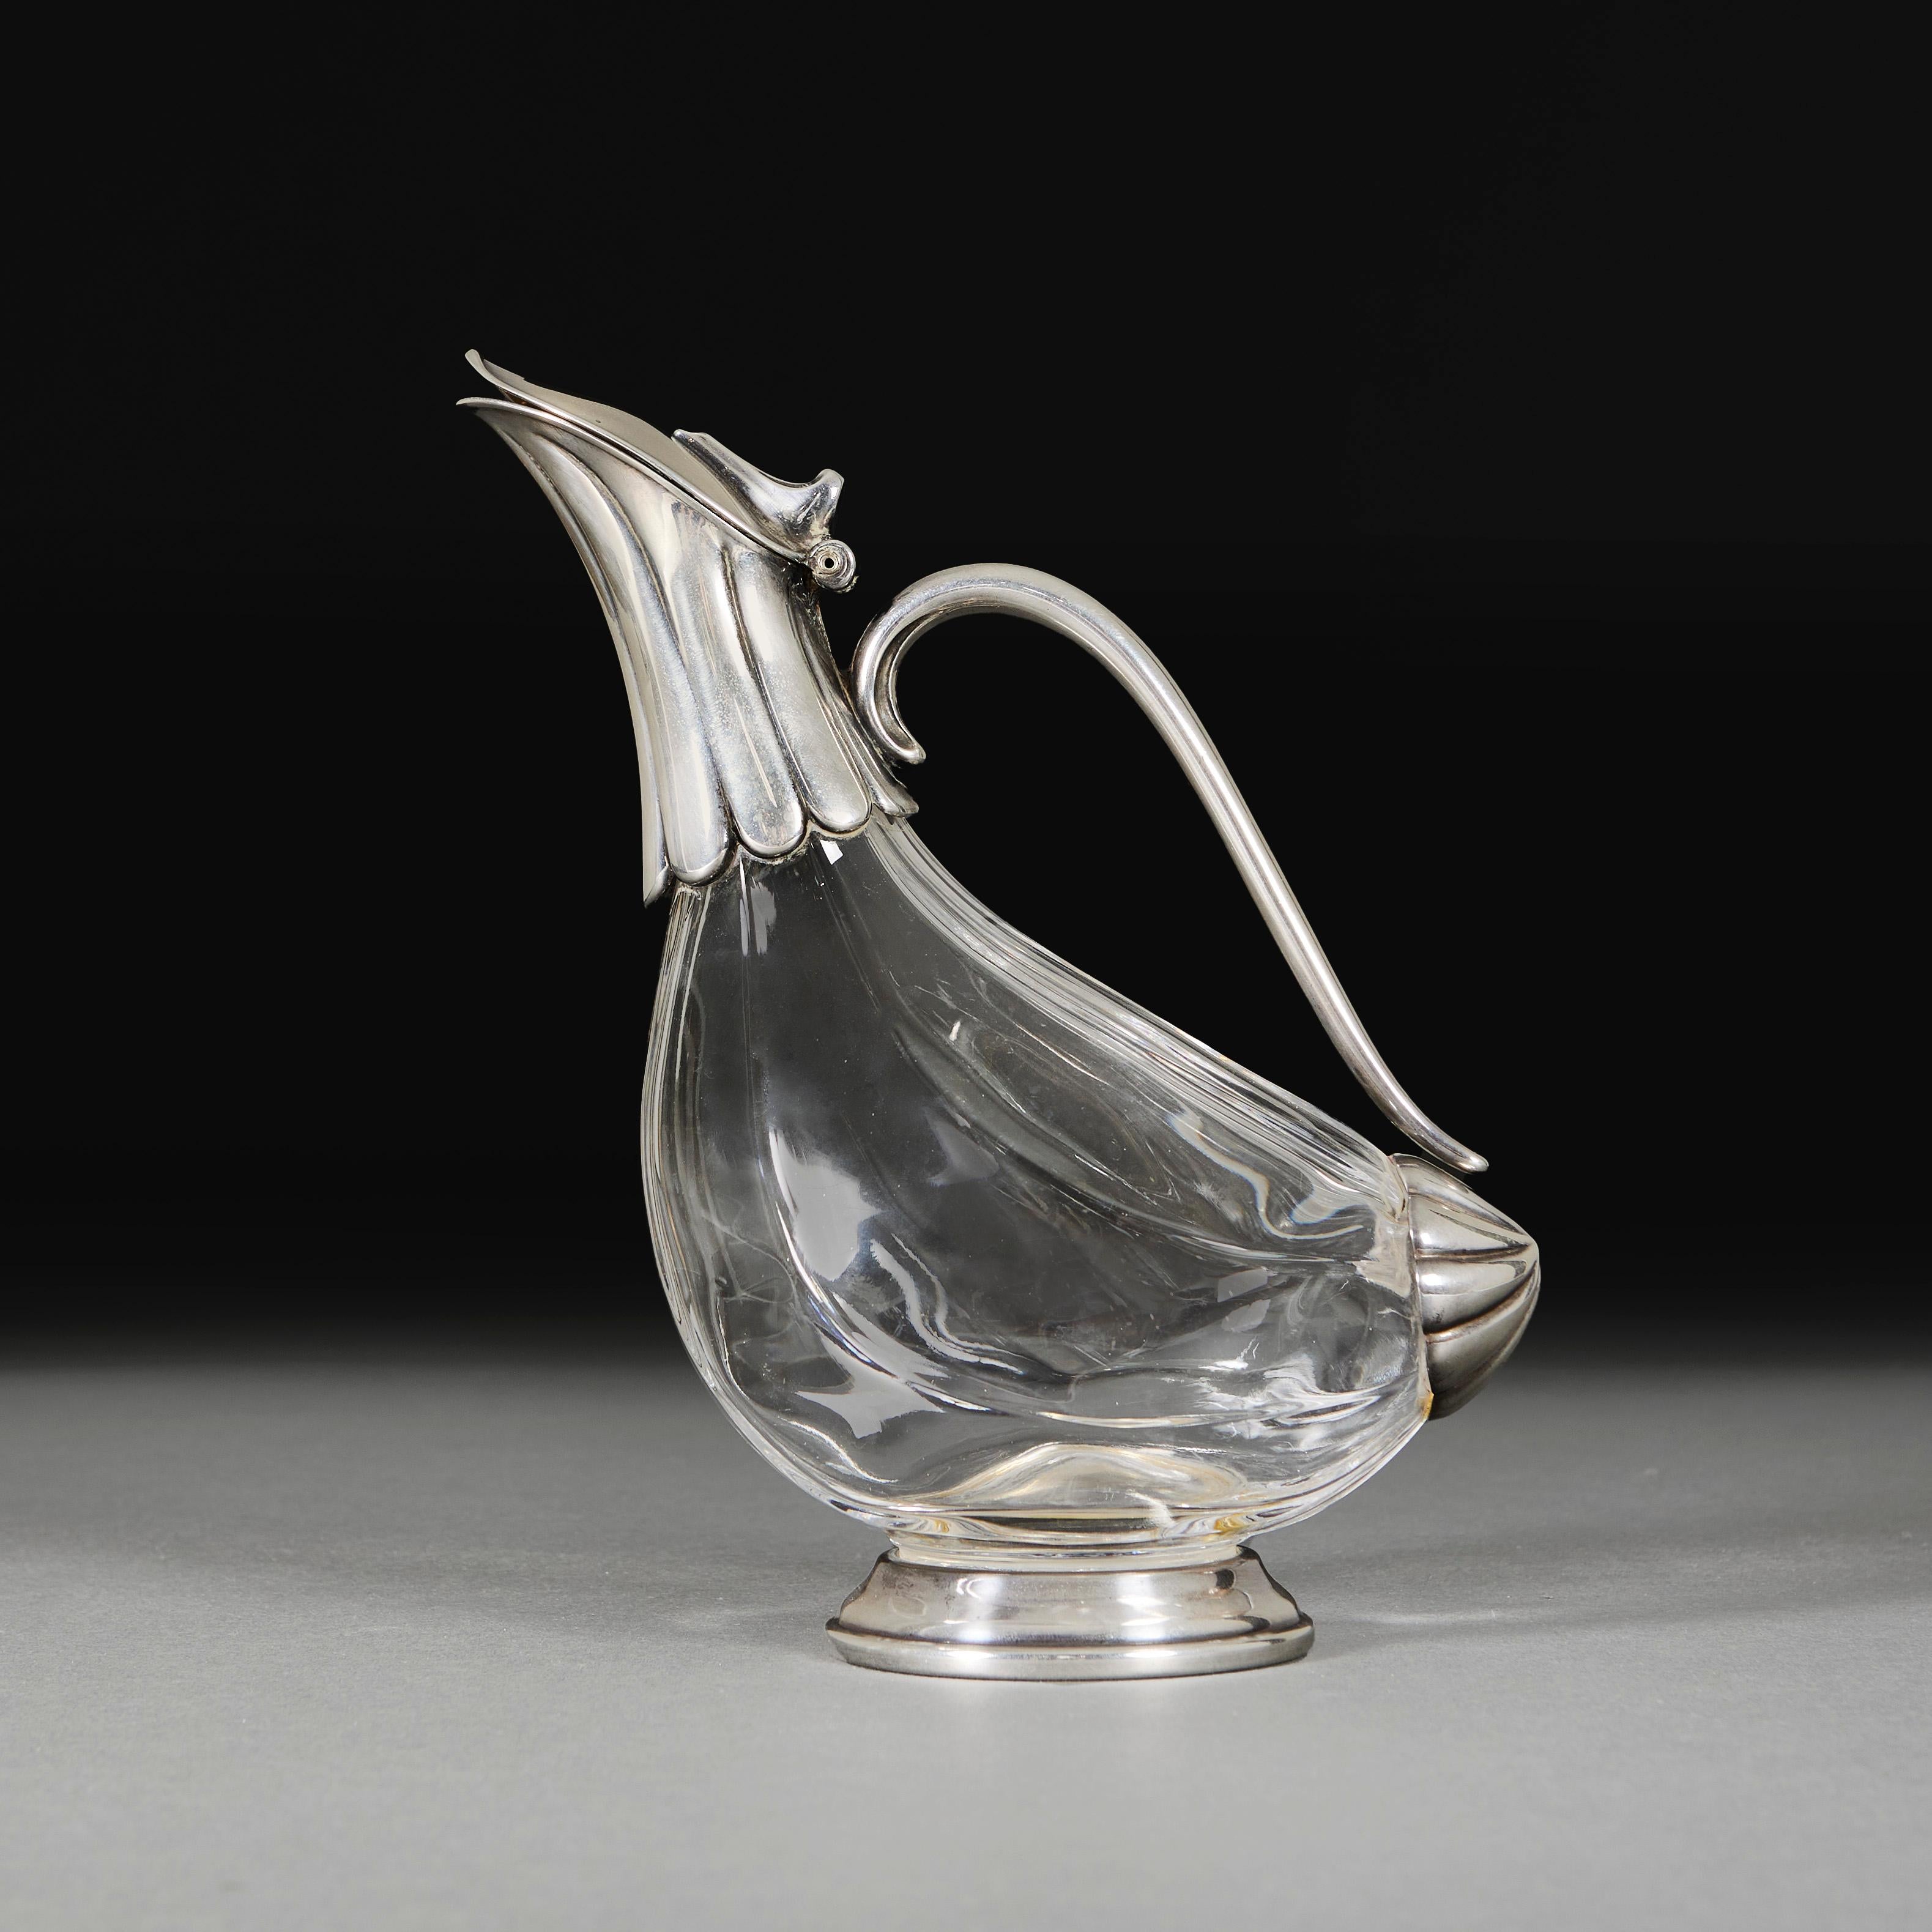 England, circa 1910

An Edwardian glass and silver decanter of zoomorphic form, imitating a duck, standing on a circular plinth base.

Height     25.00cm

Width      20.00cm

Depth      9.00cm